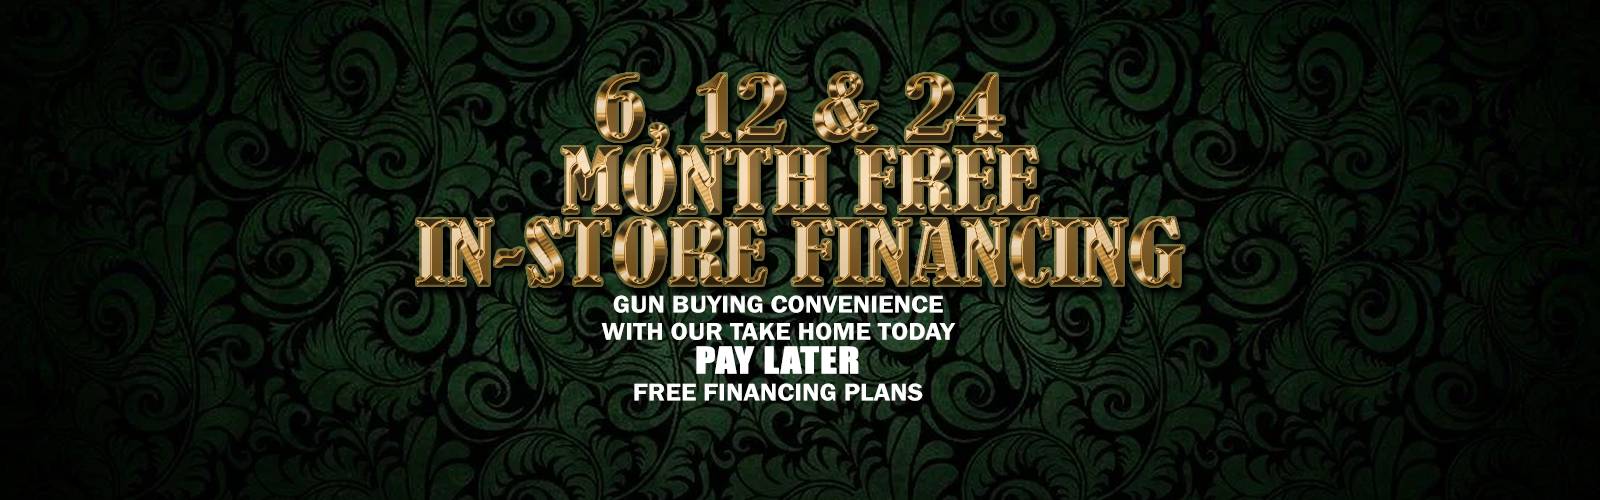 Carters Country - Free Financing, It's Back!